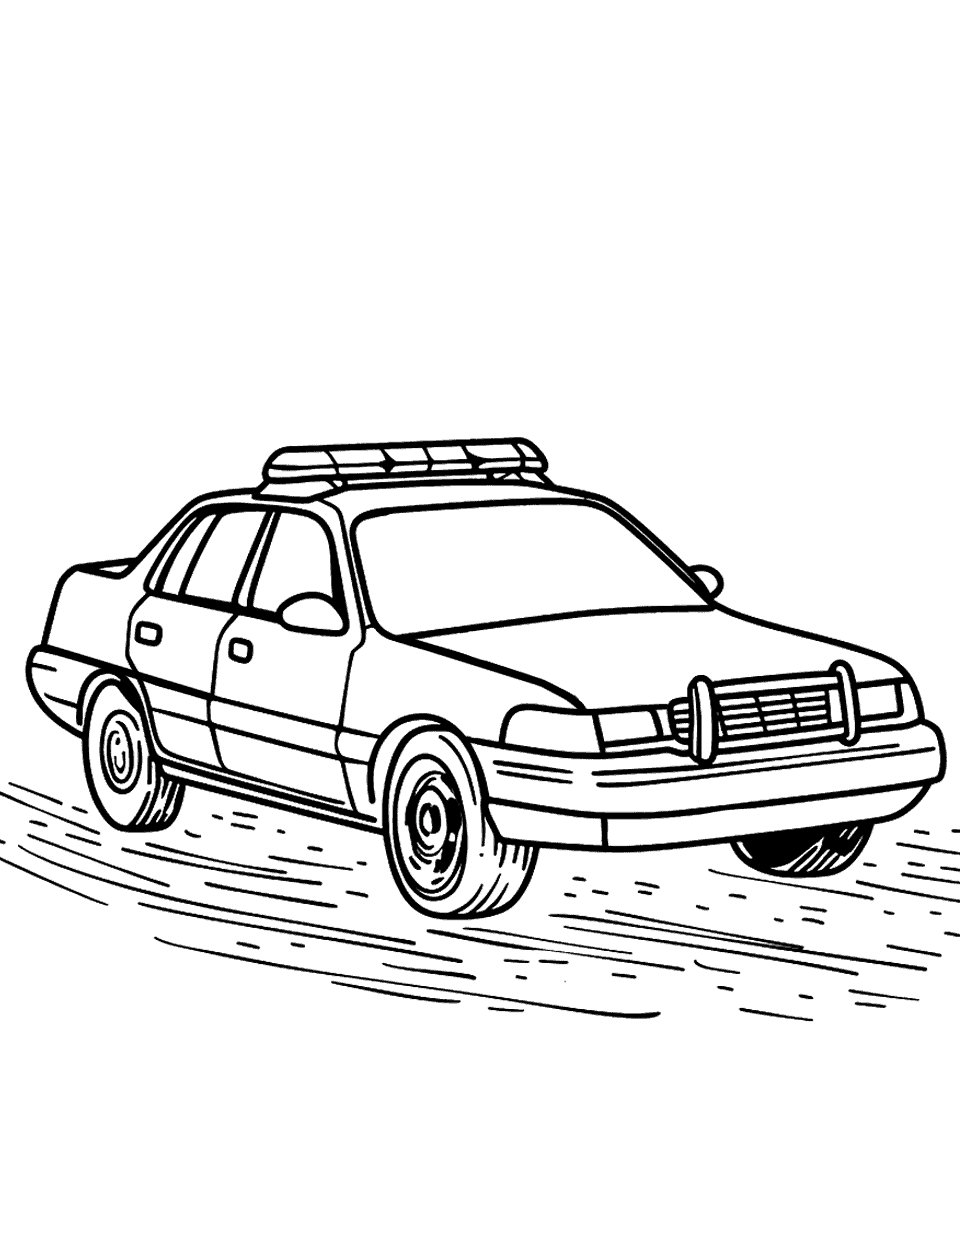 Responding to an Emergency Police Car Coloring Page - A police car speeding with sirens blaring towards an emergency scene.